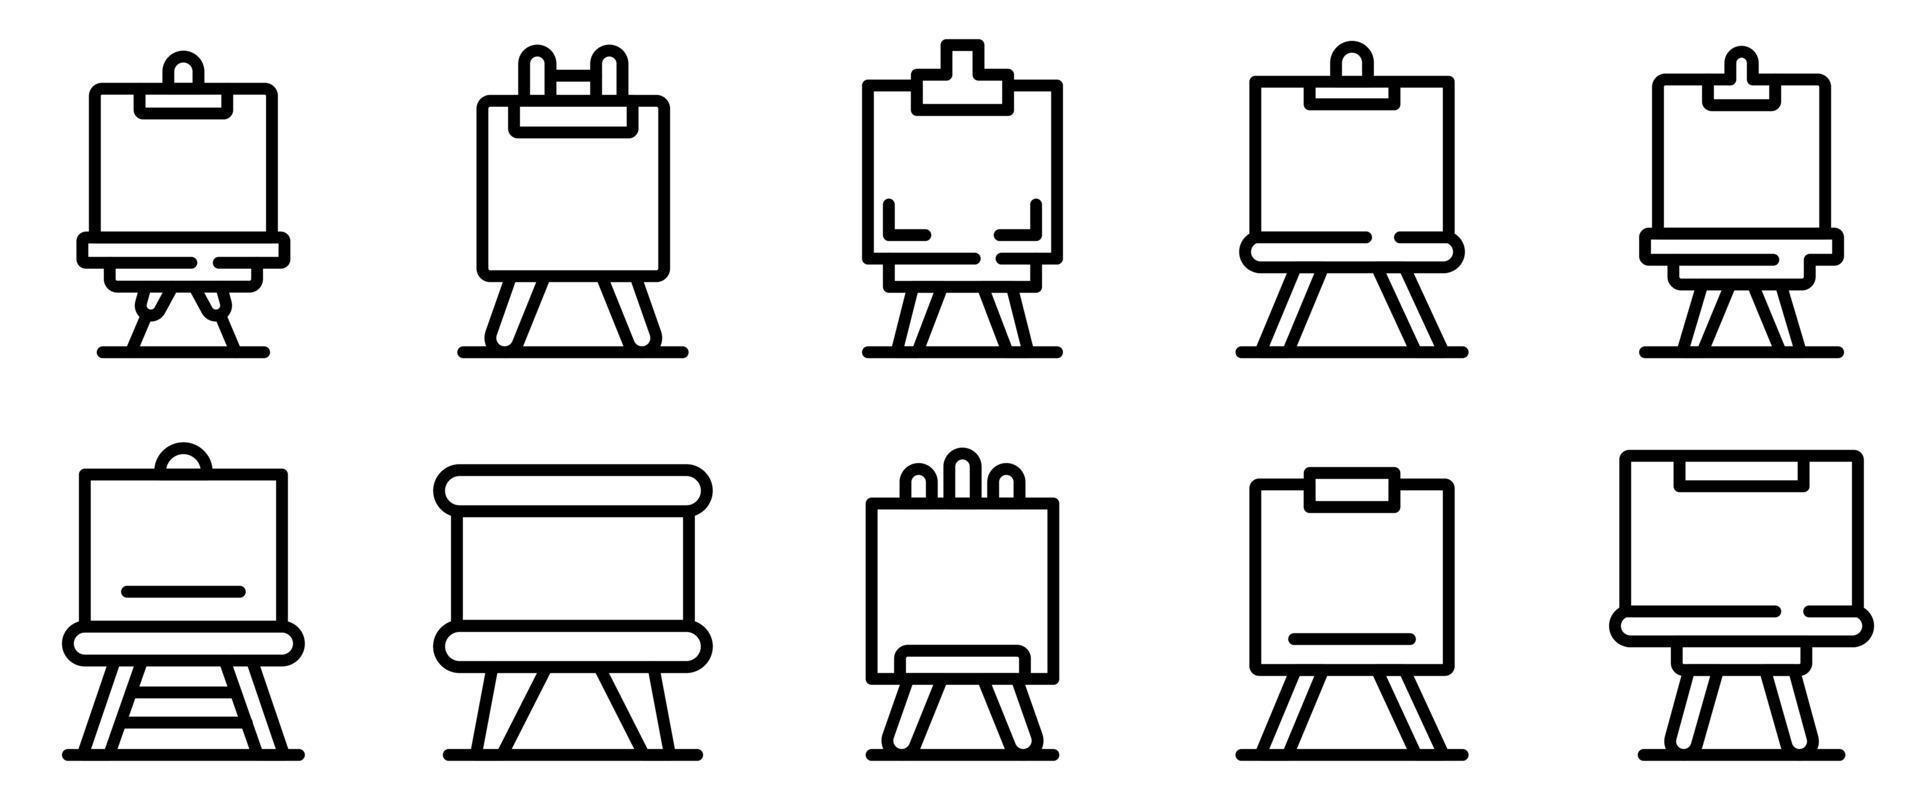 Easel icons set, outline style vector